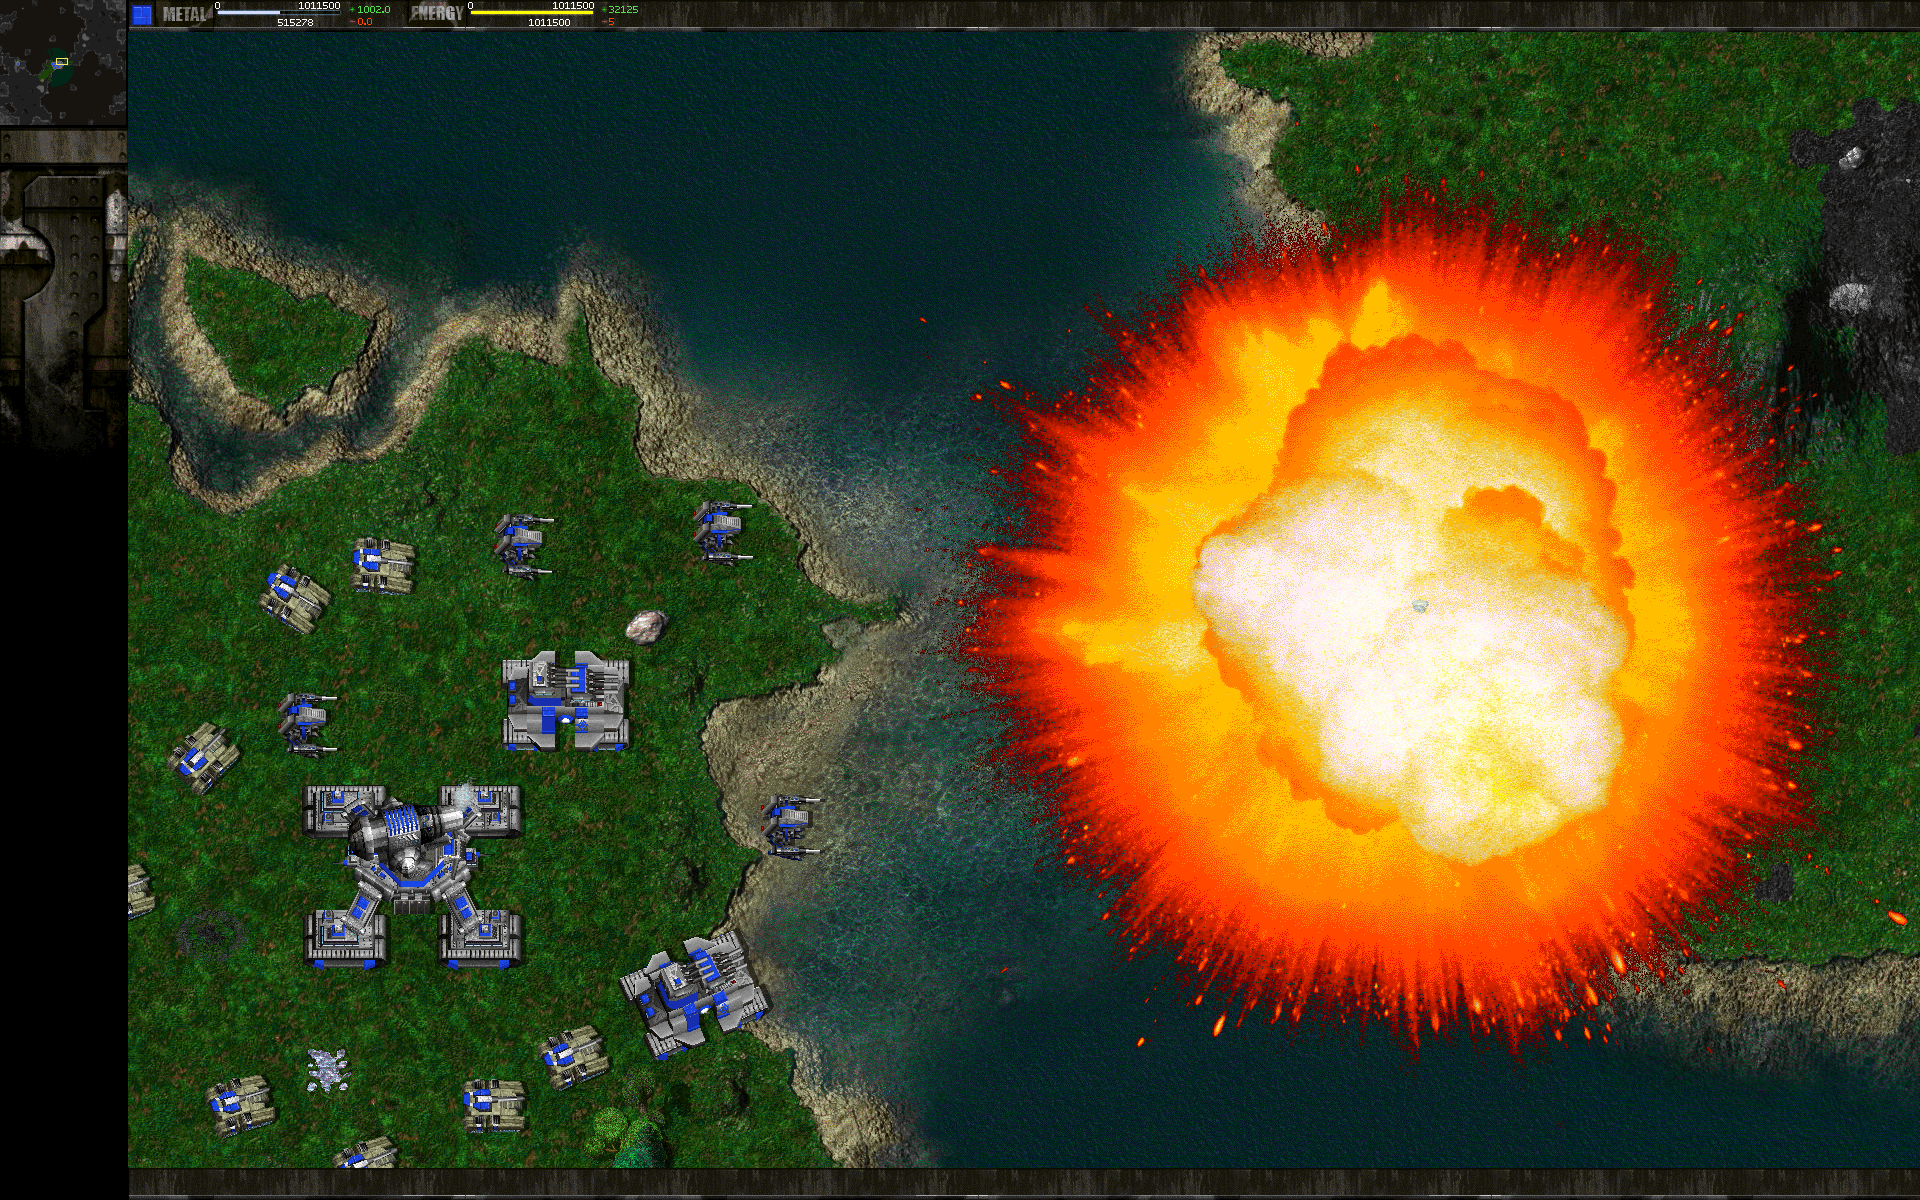 total annihilation targeting facility